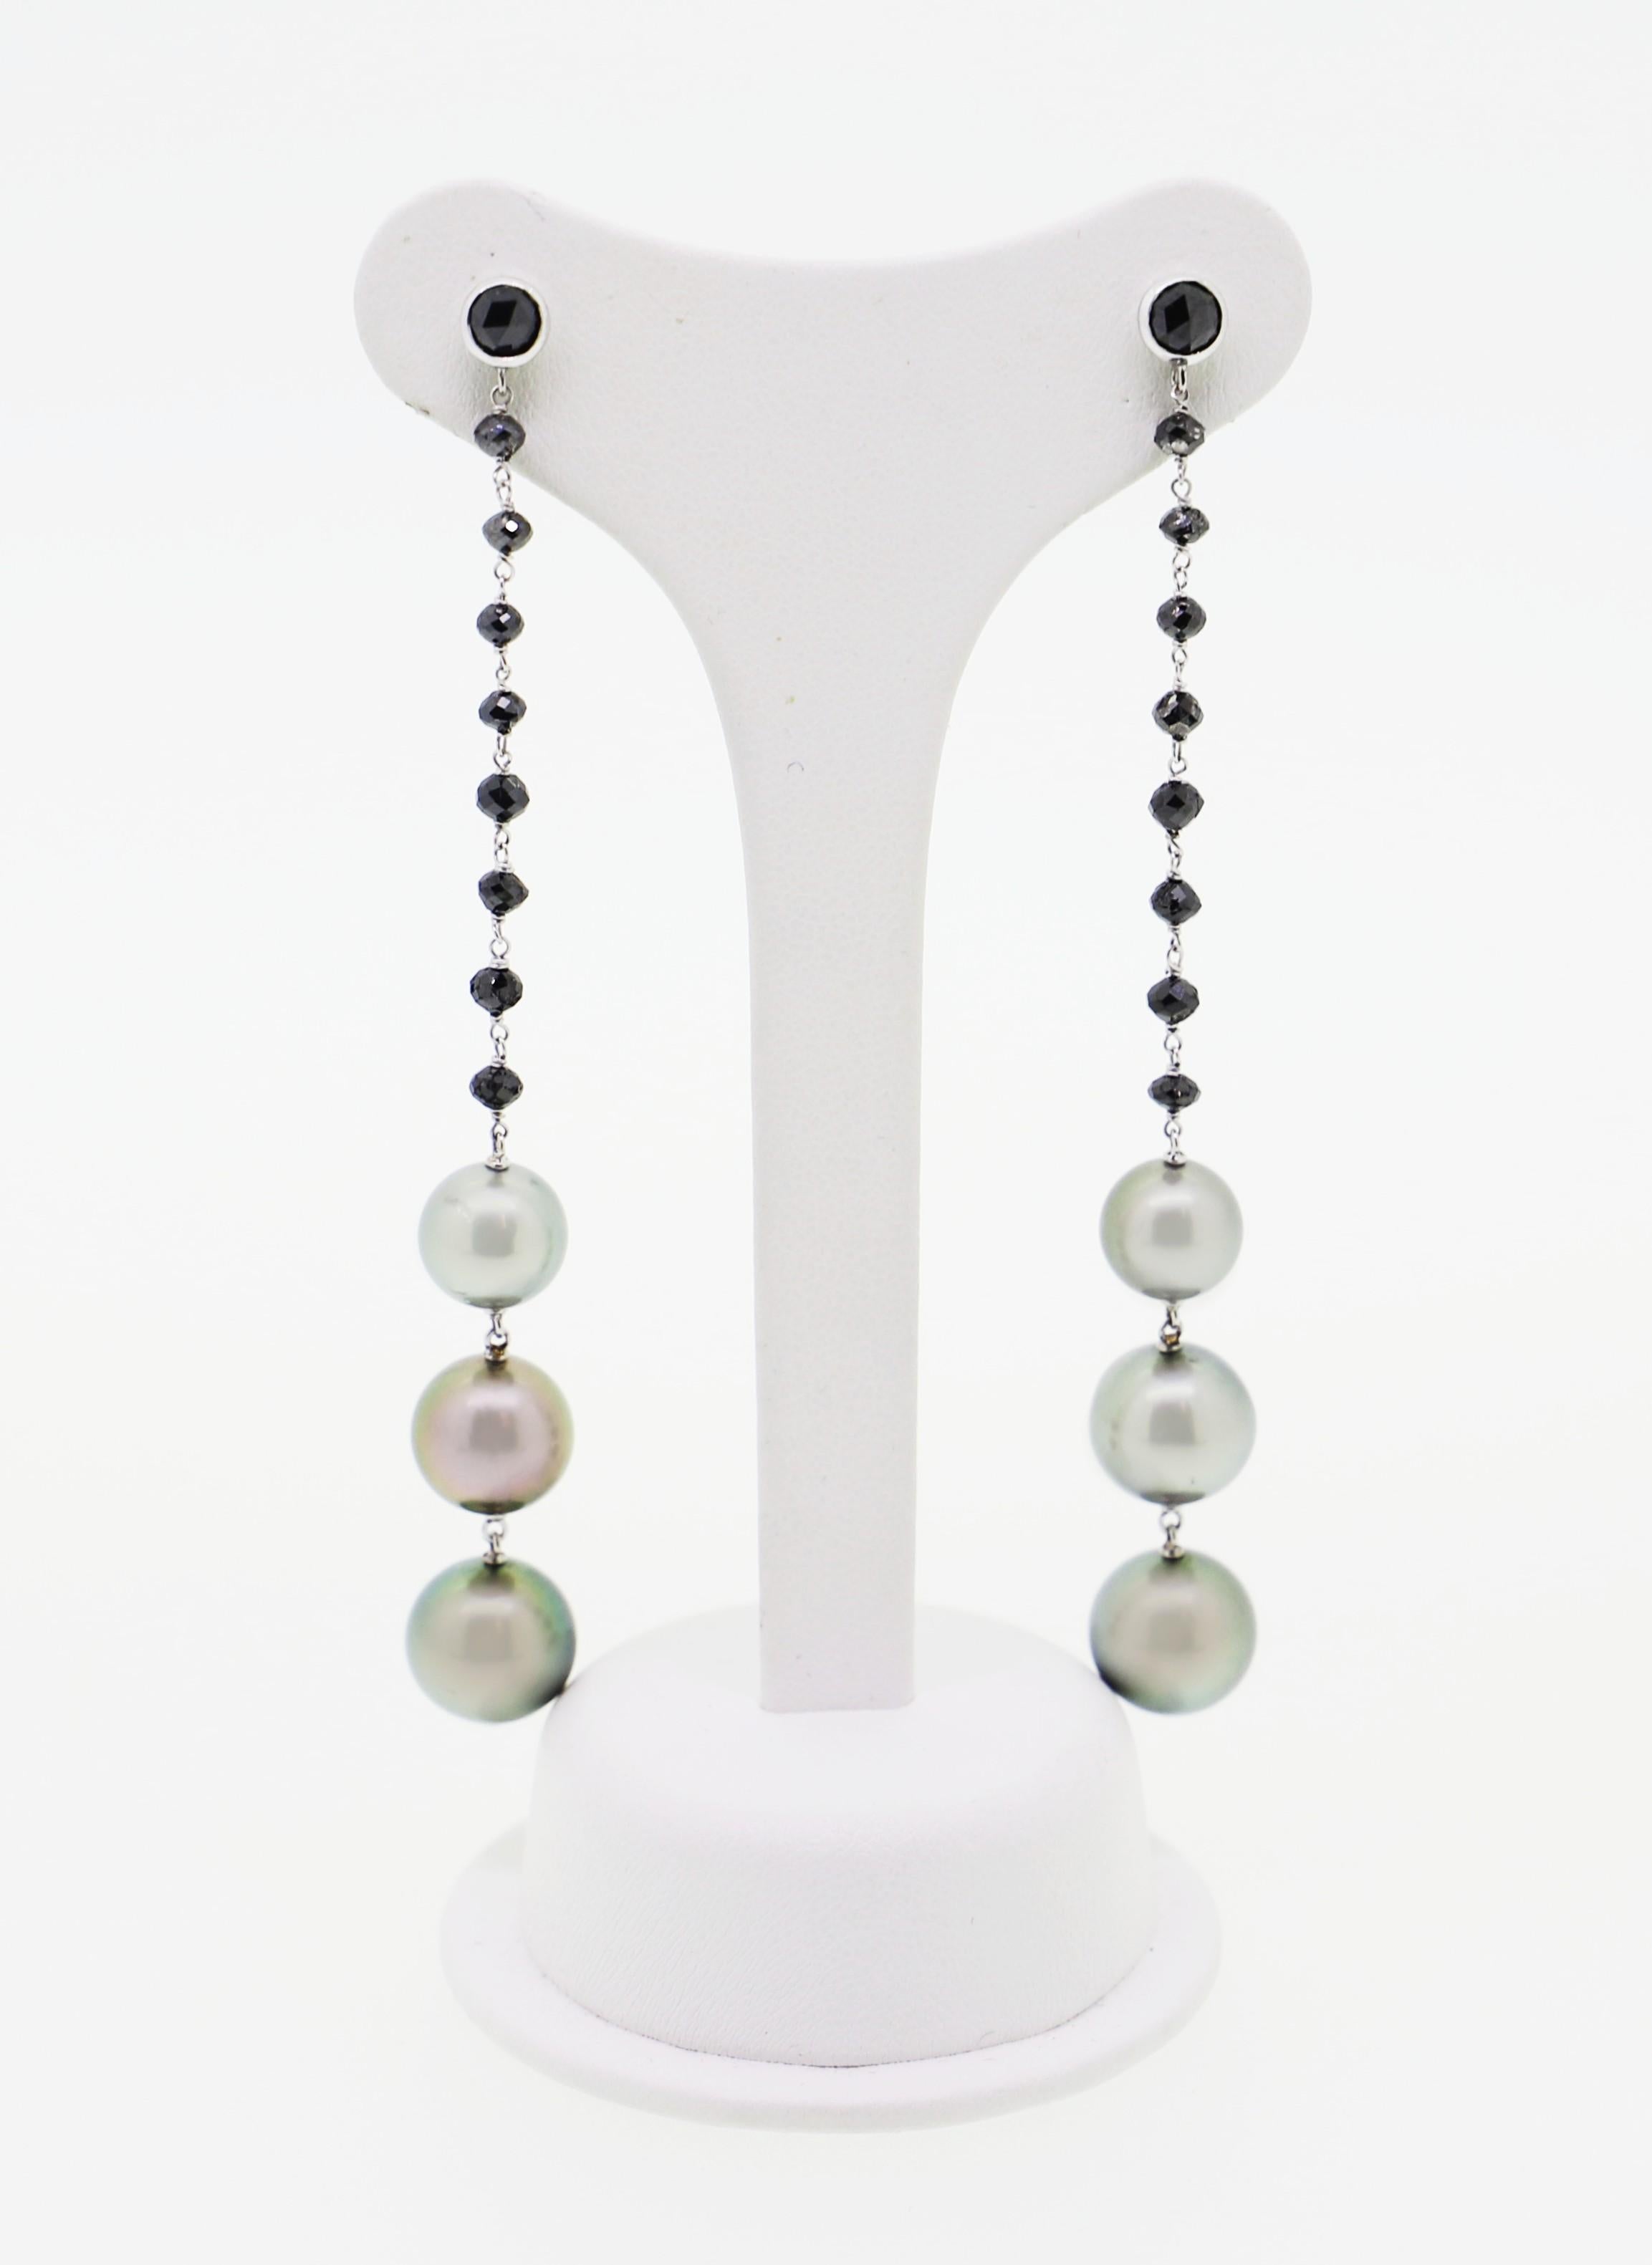 Contemporary 46.10 Carat Tahity Pearls with Black Diamond Beads Dangle Earrings For Sale